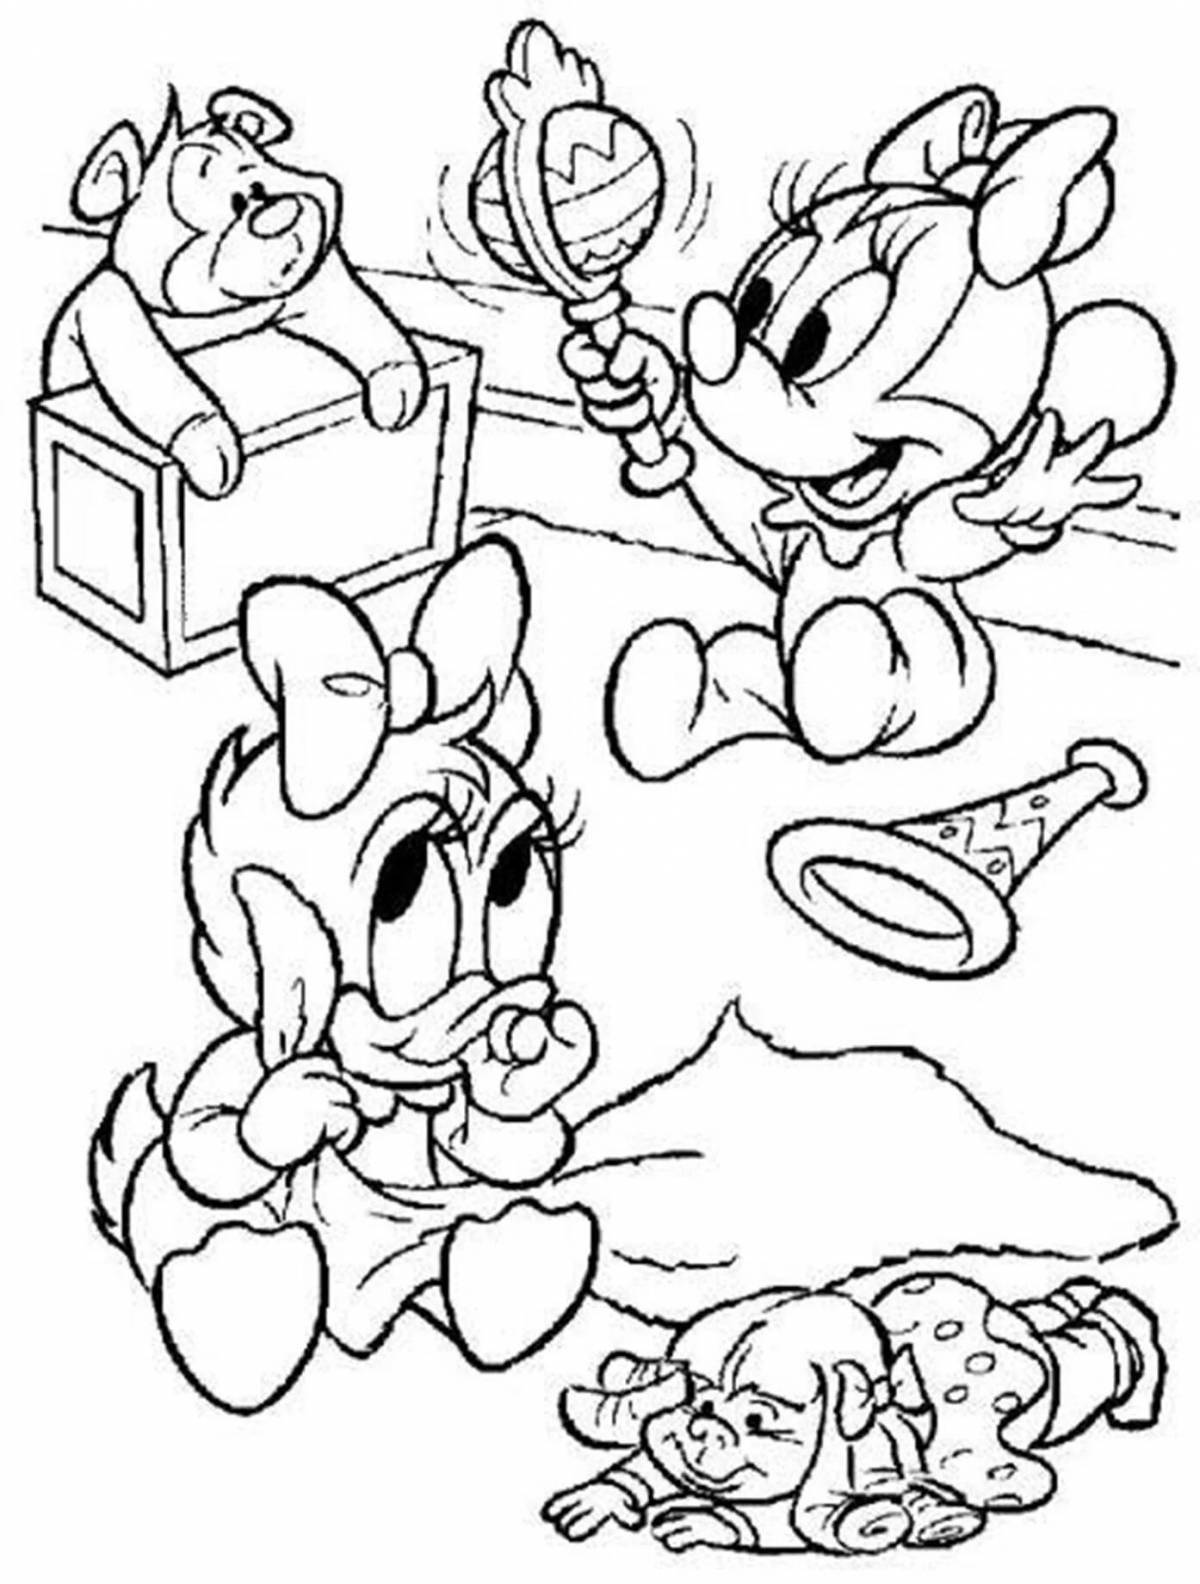 A fun Minnie Mouse coloring book for kids